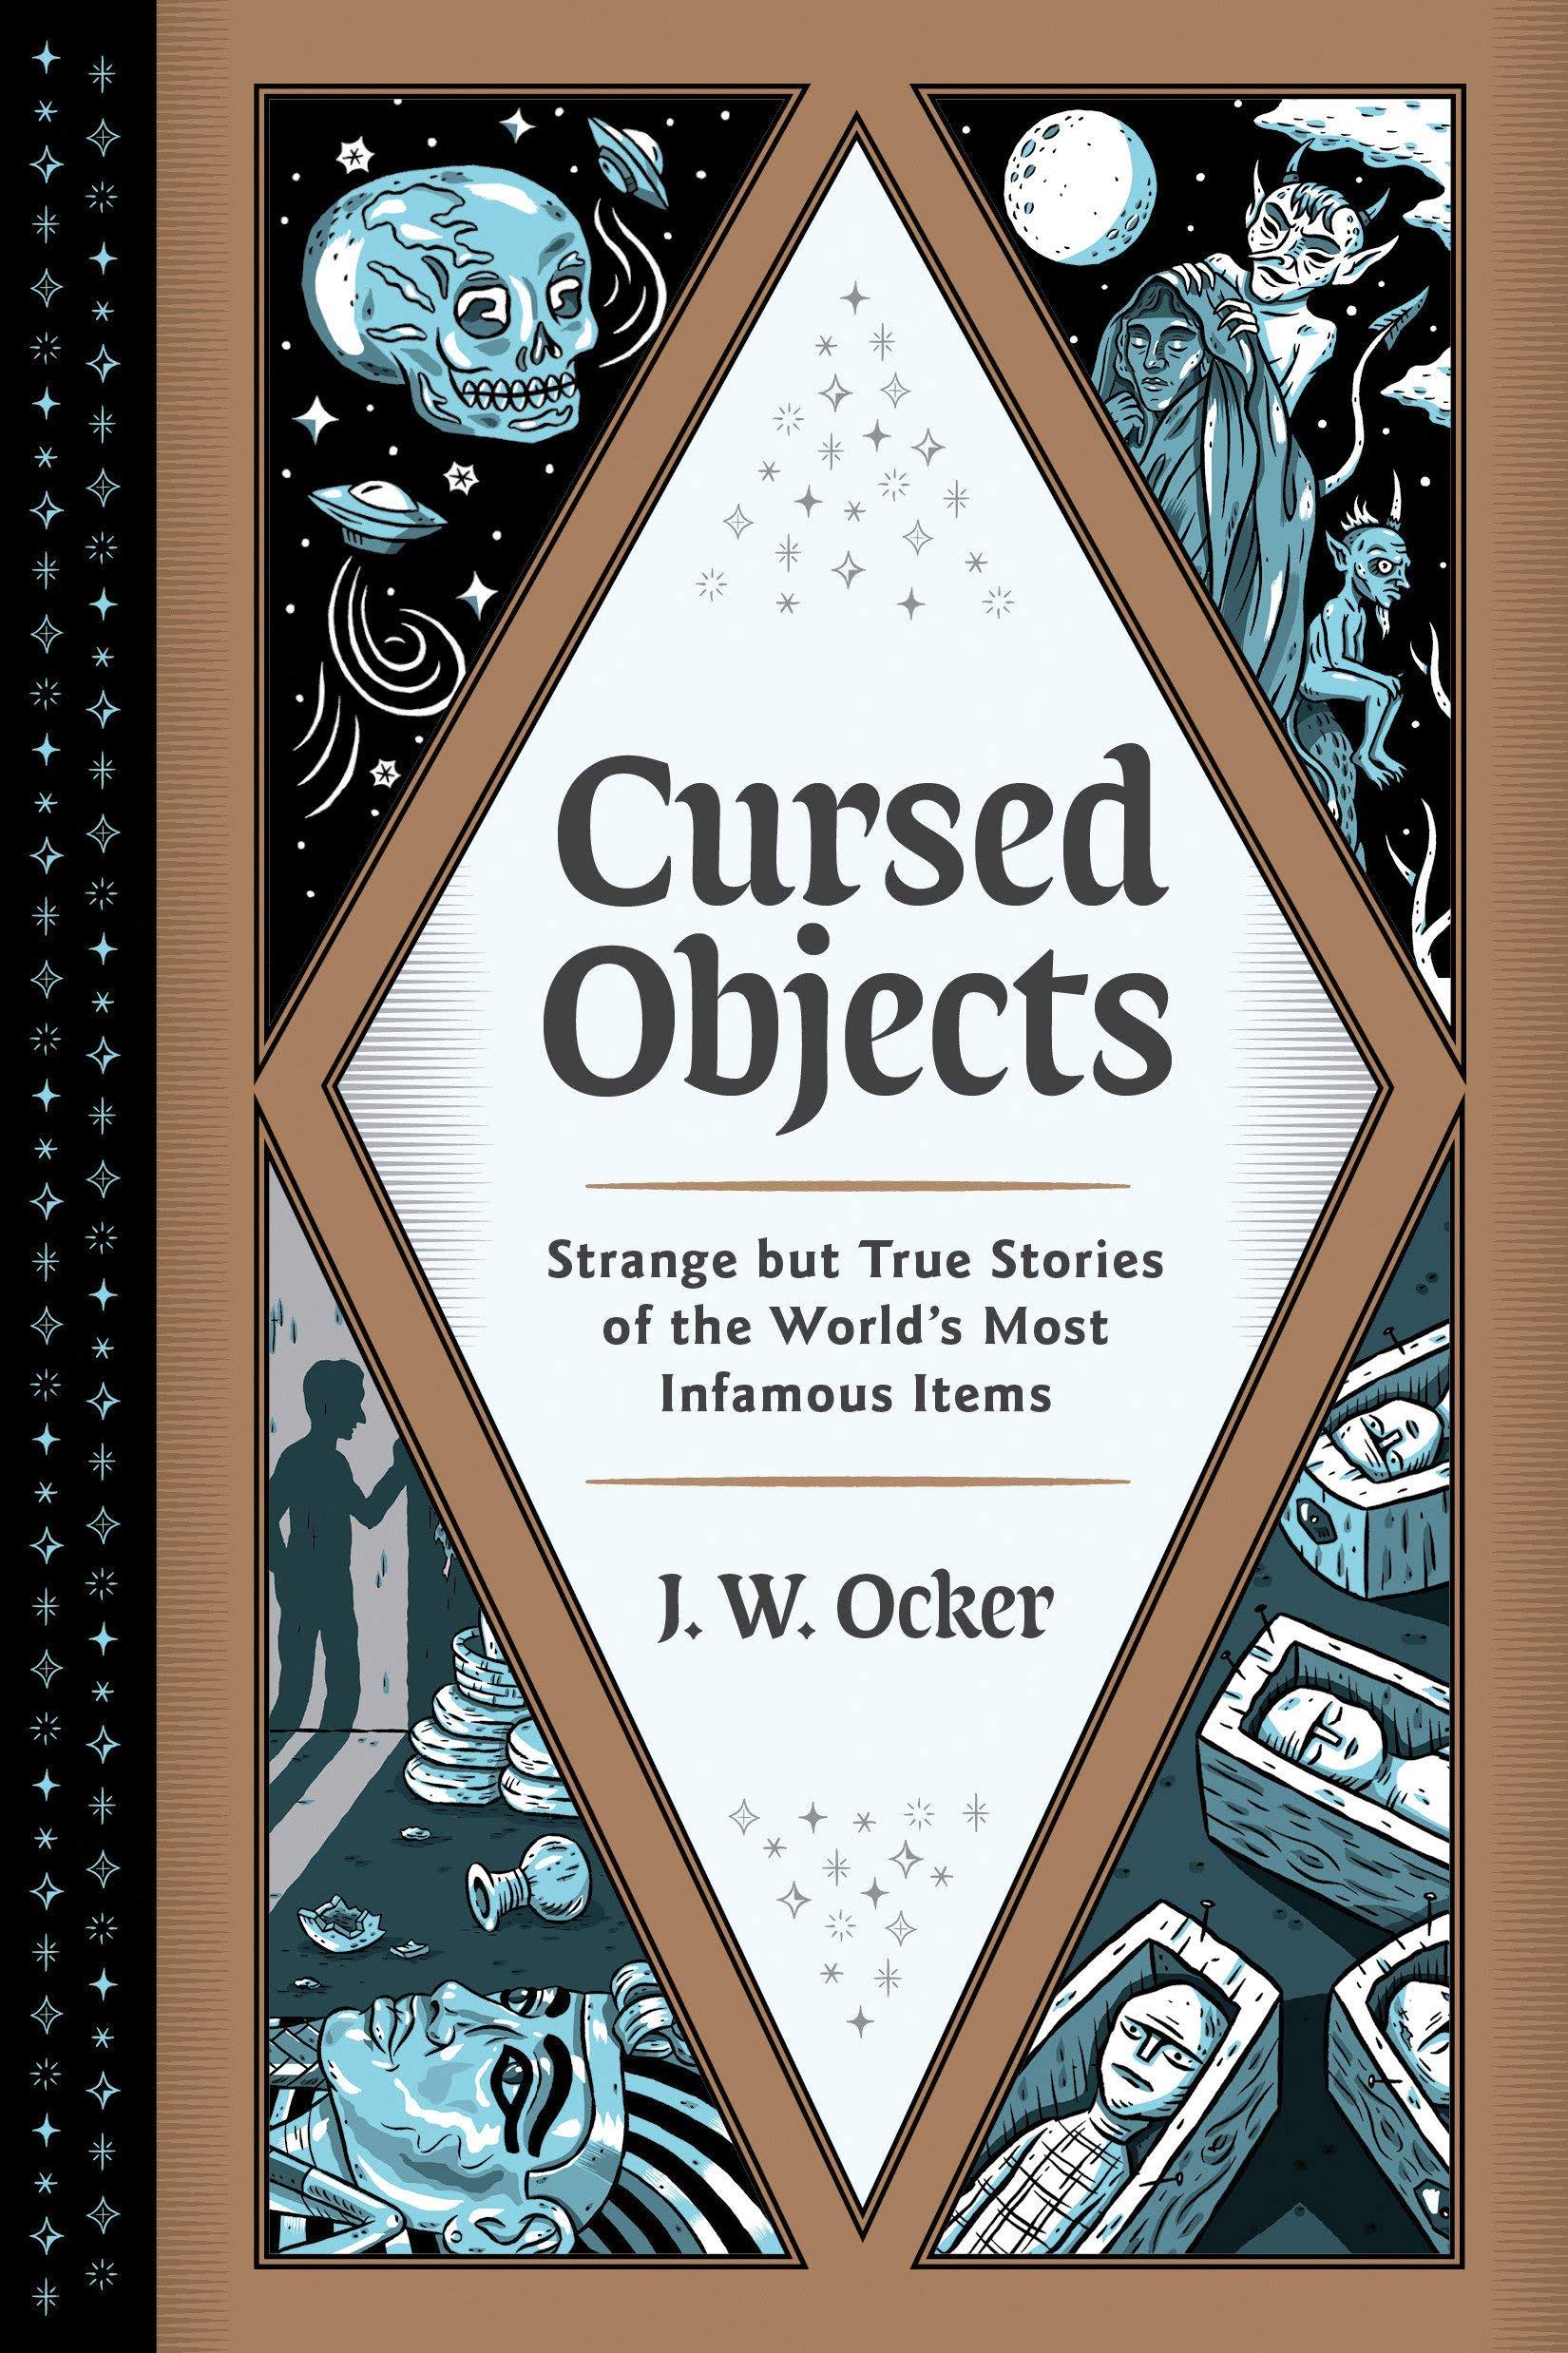 Cursed Objects: Strange But True Stories of the World's Most Infamous Items [Book]